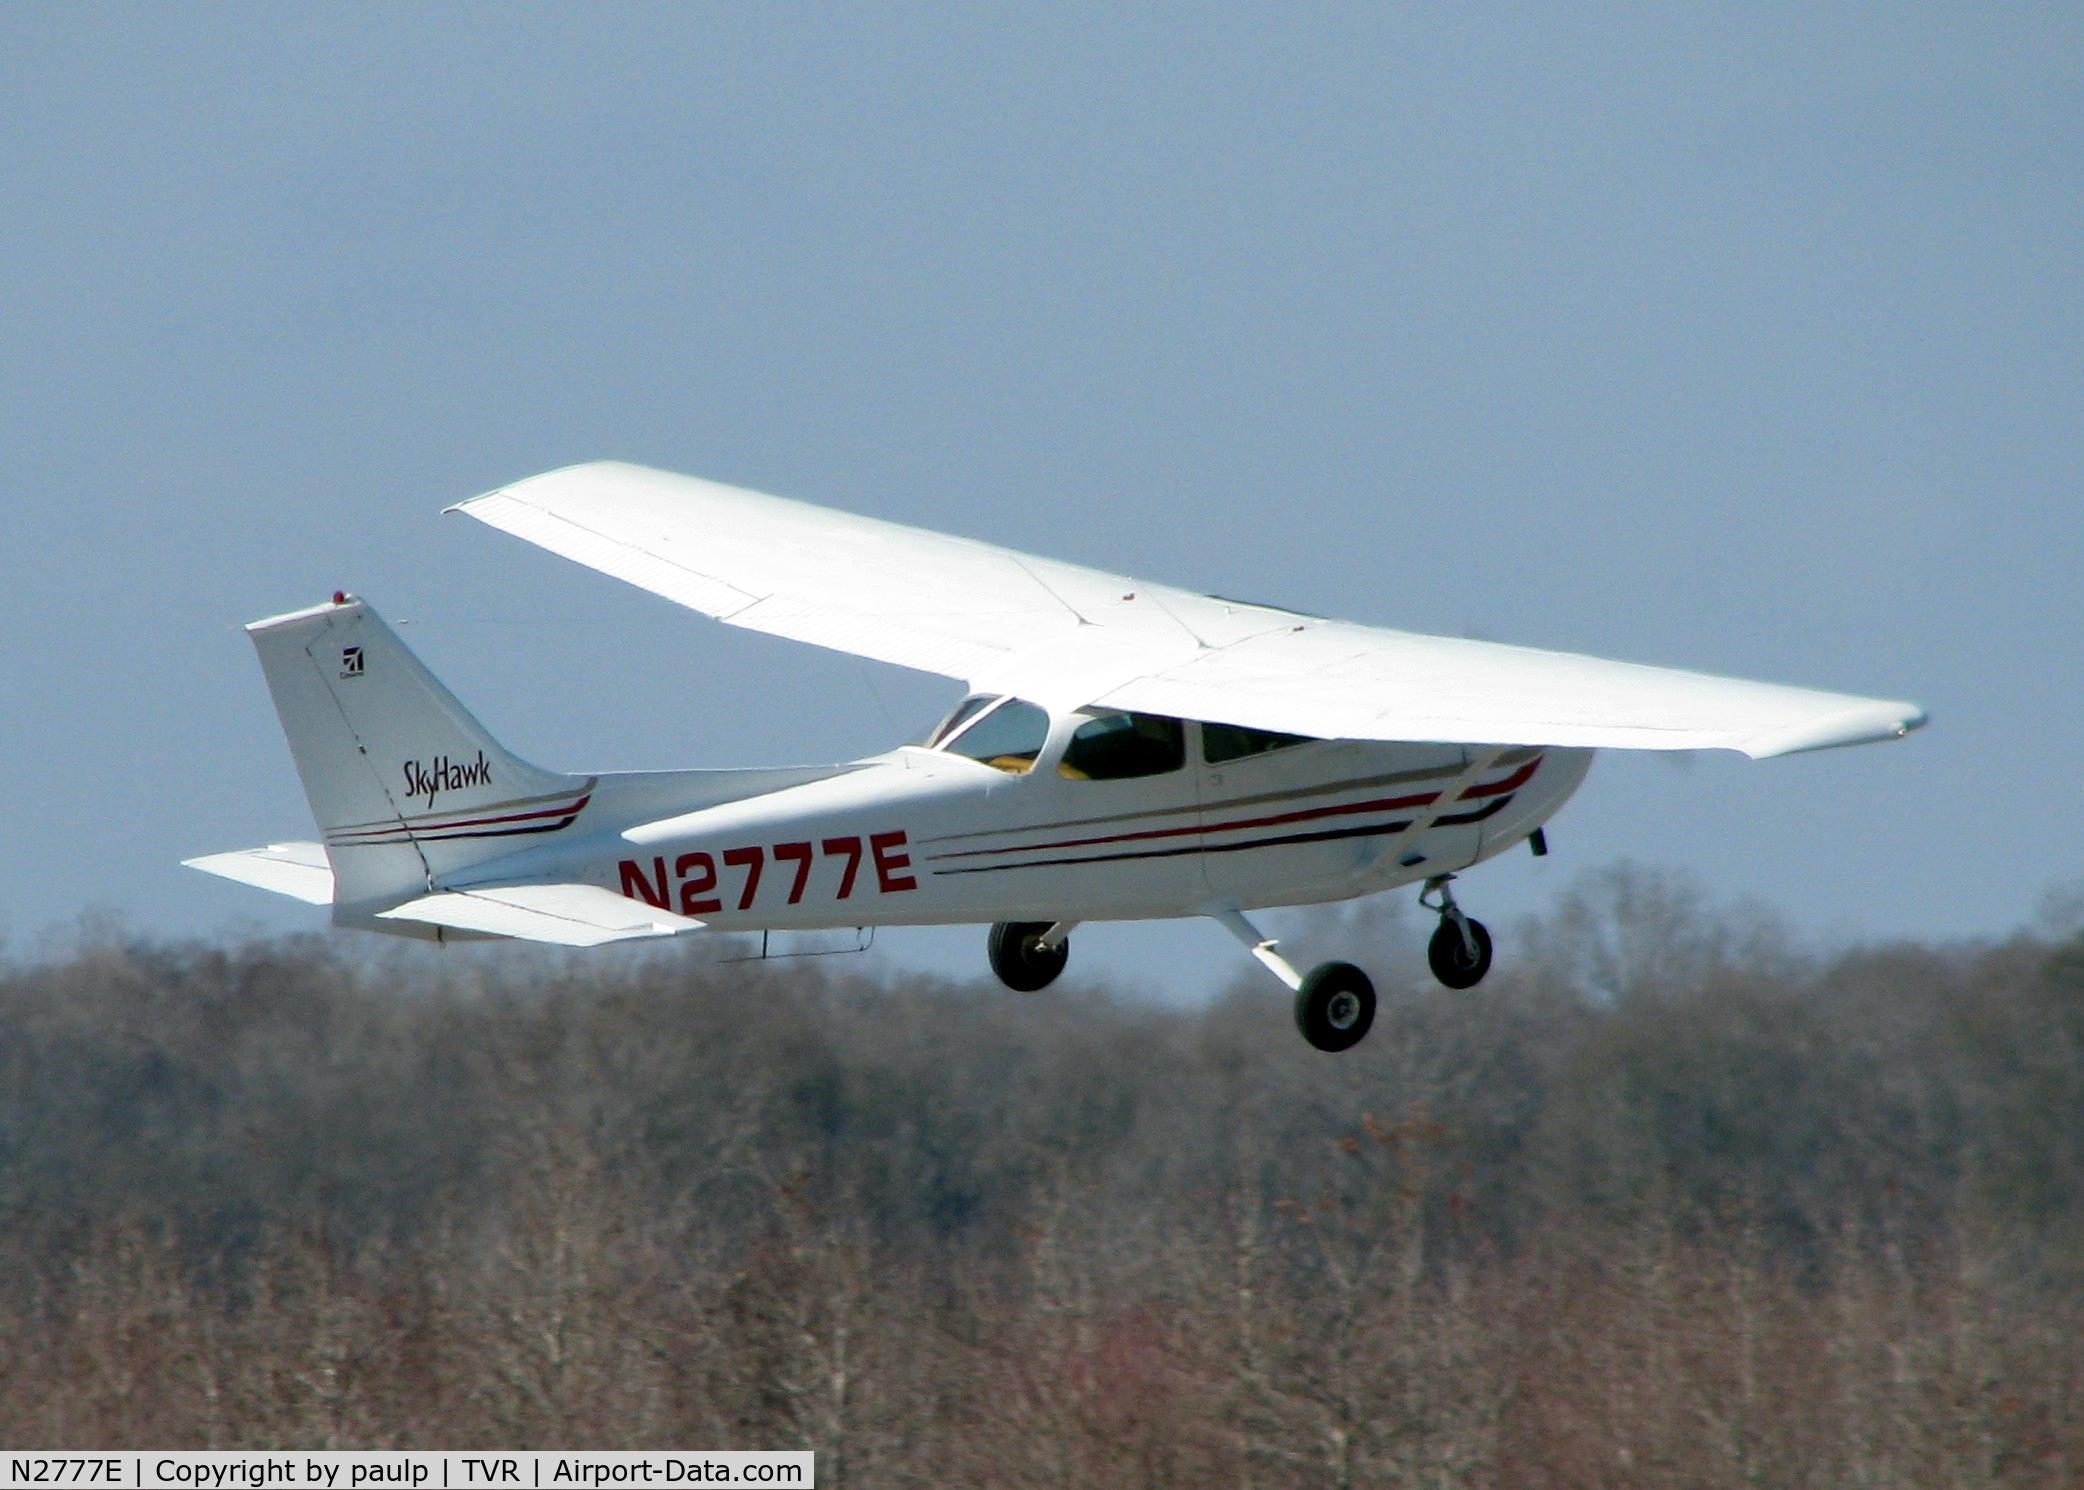 N2777E, 1974 Cessna 172M C/N 17262885, Touch and go at the Tallulah / Vicksburg airport.